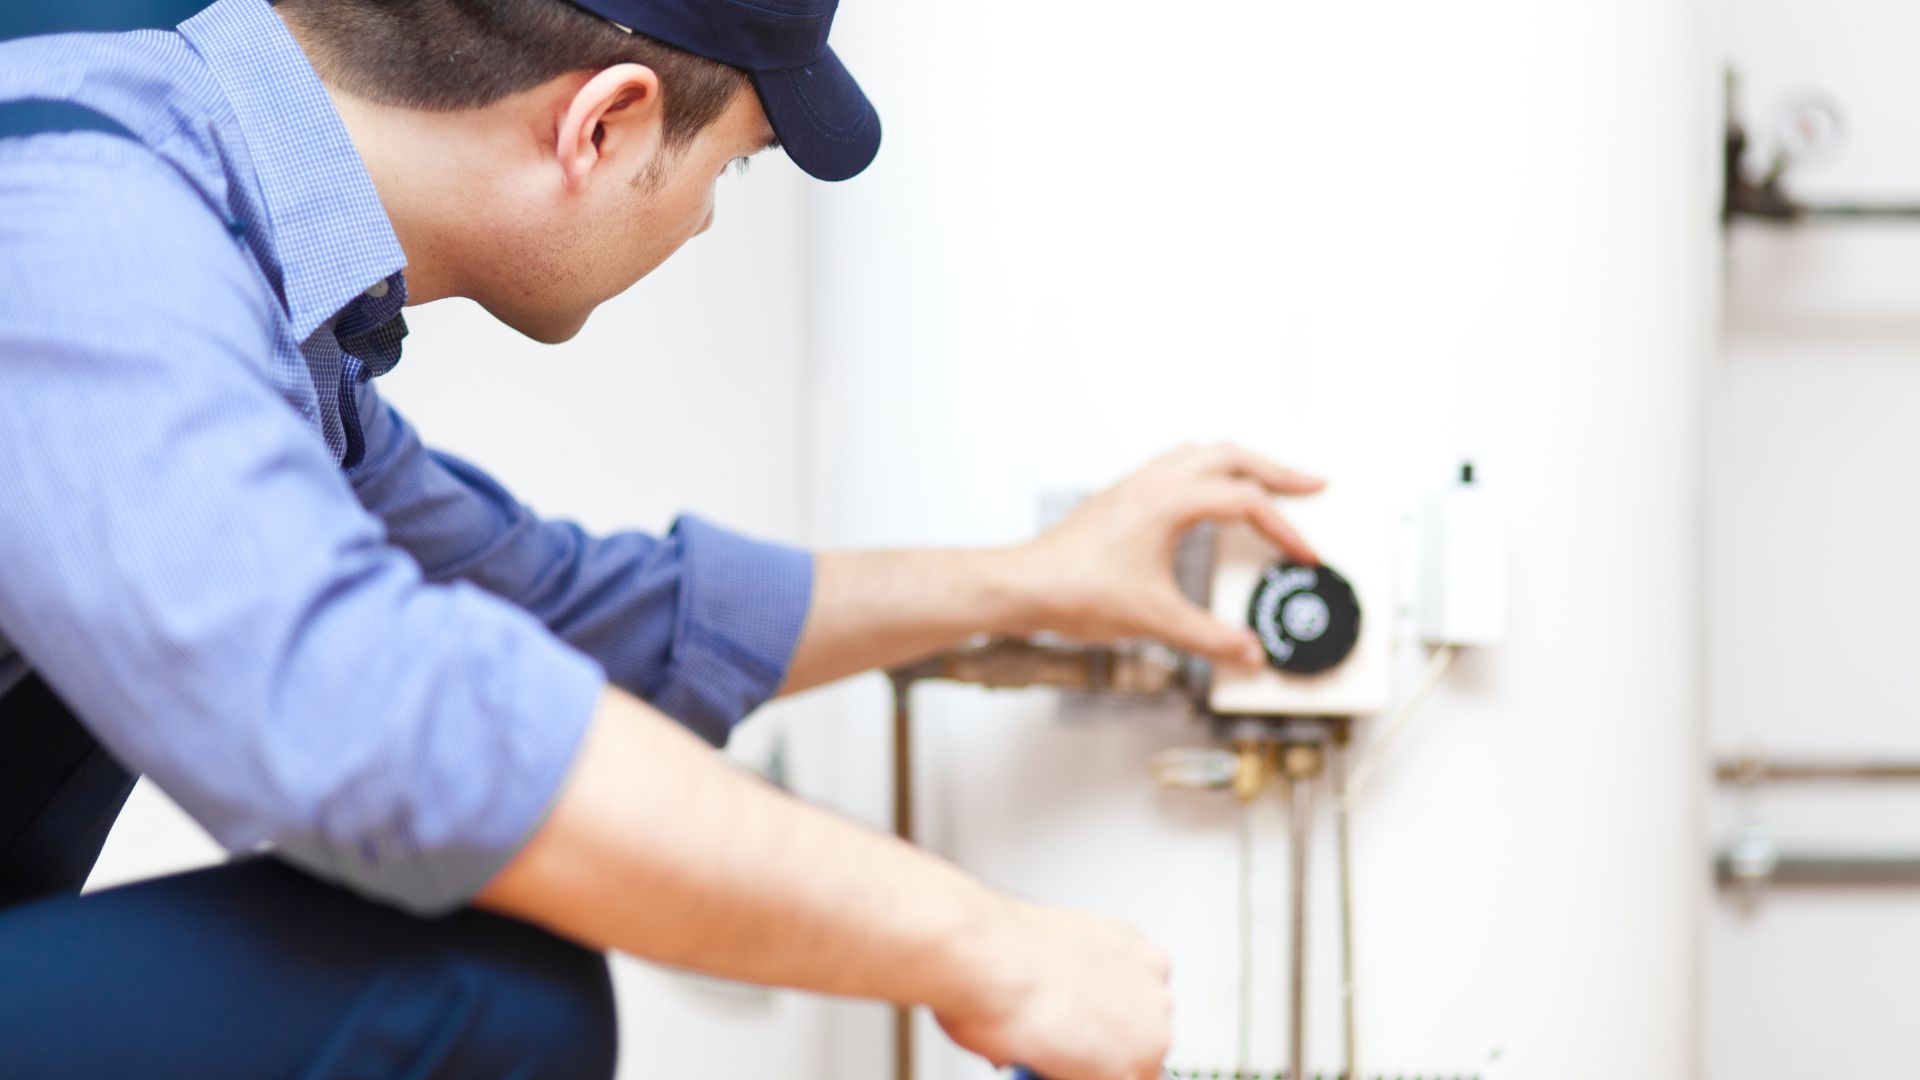 Get in touch with CAN Plumbing and Drainage for any requirements regarding water heaters.